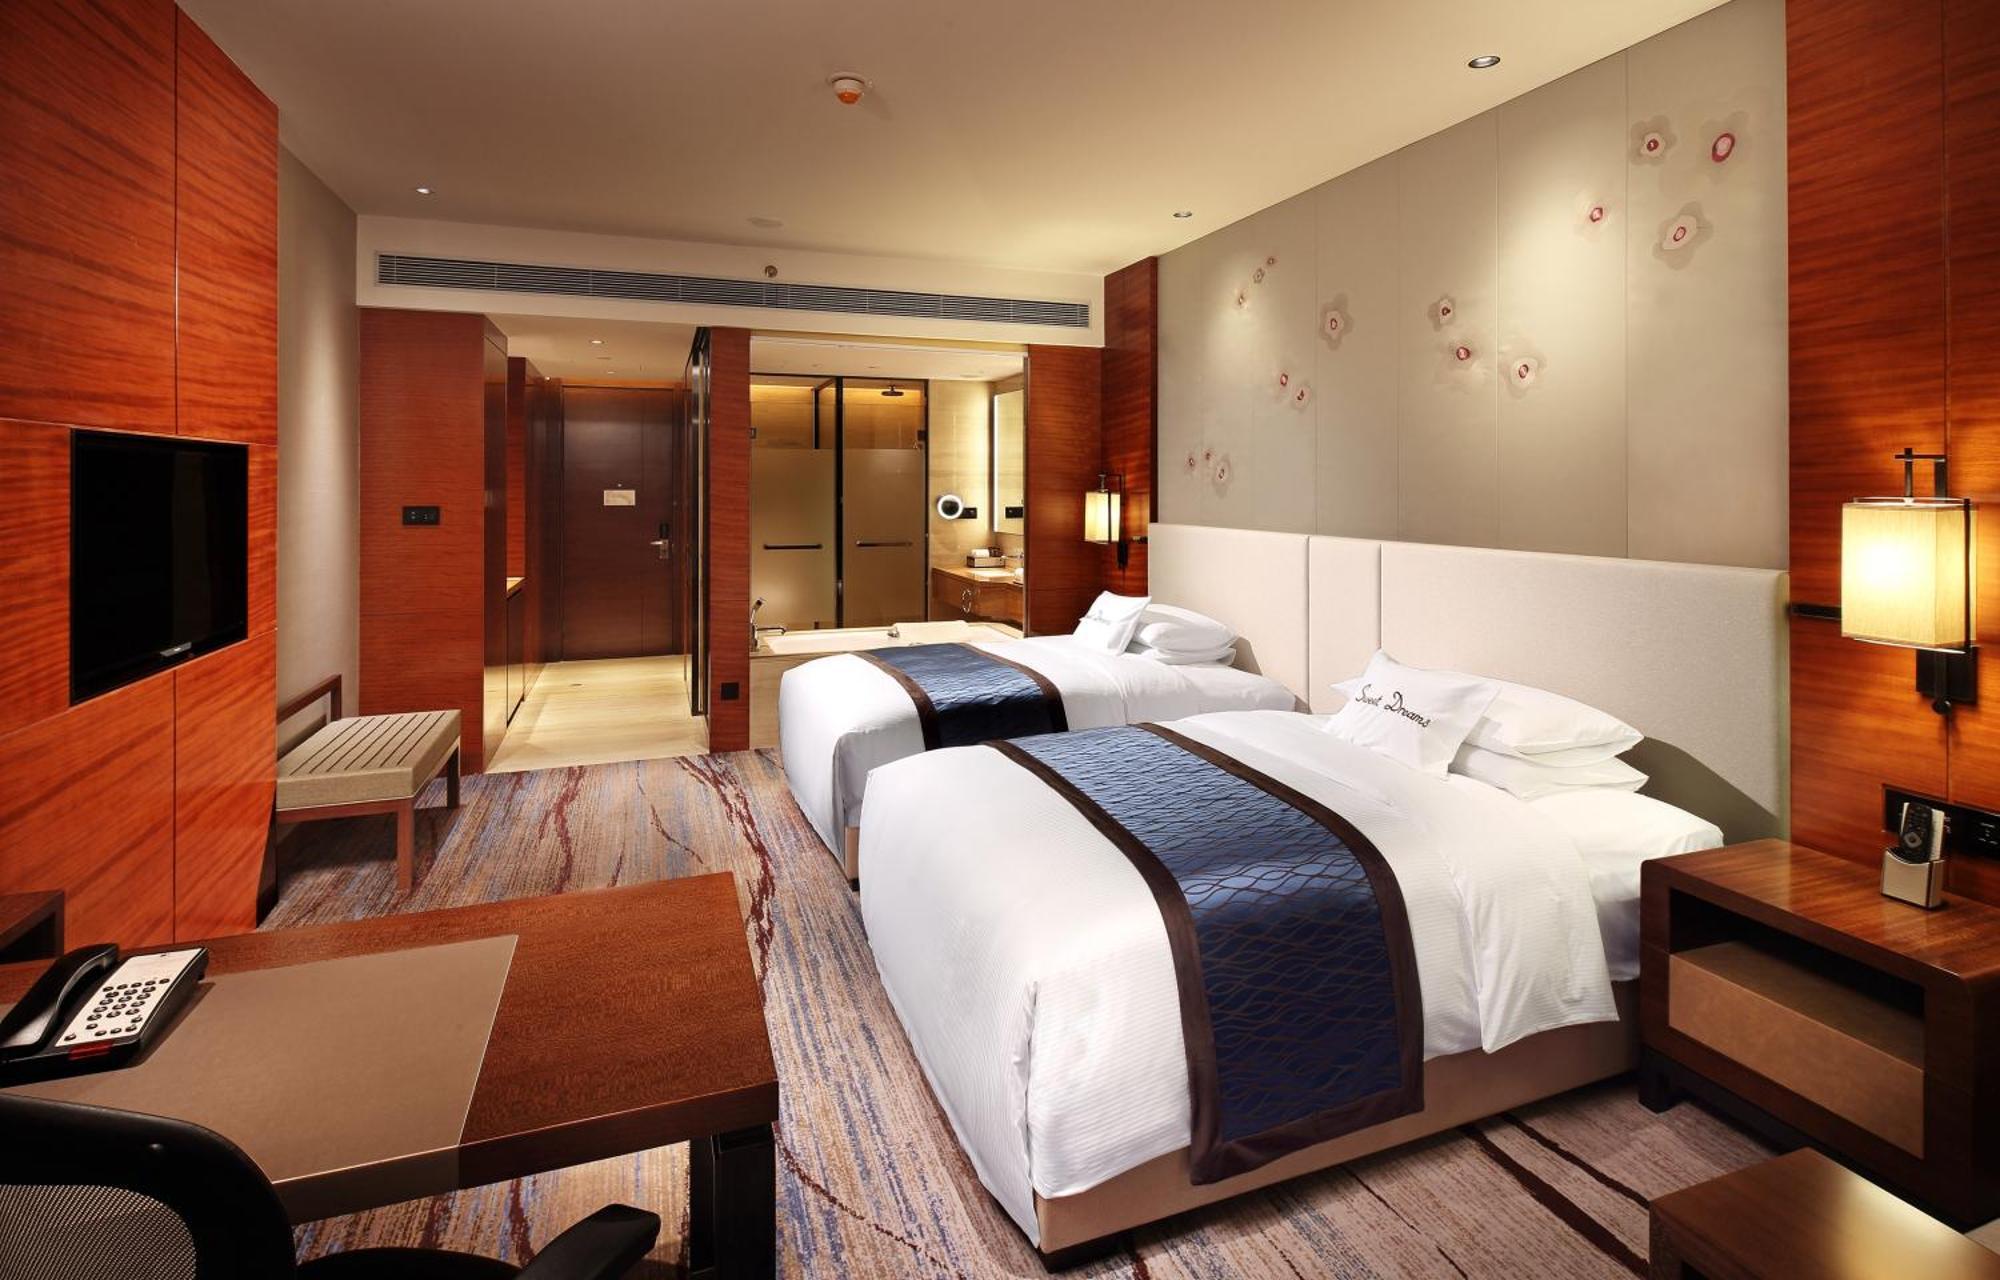 Doubletree By Hilton Hotel Guangzhou-Science City-Free Shuttle Bus To Canton Fair Complex And Dining Offer Dış mekan fotoğraf